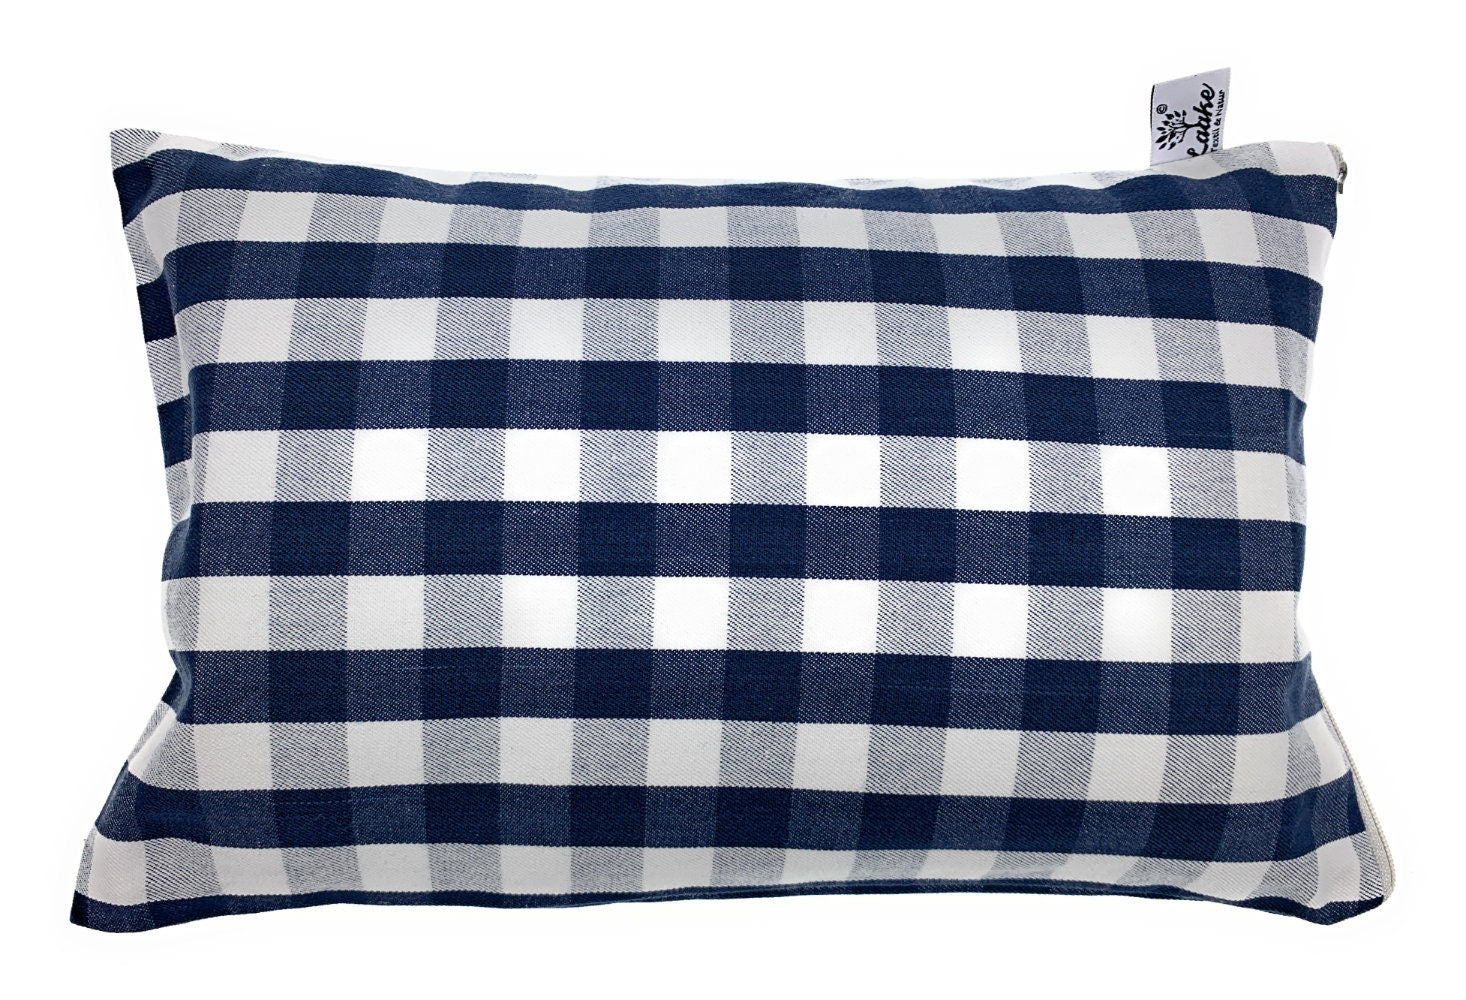 Swiss stone pine cushion Blue-white-checkered cotton filled with Tyrolean pine wood | Dimensions: 30 x 20 x 9 cm